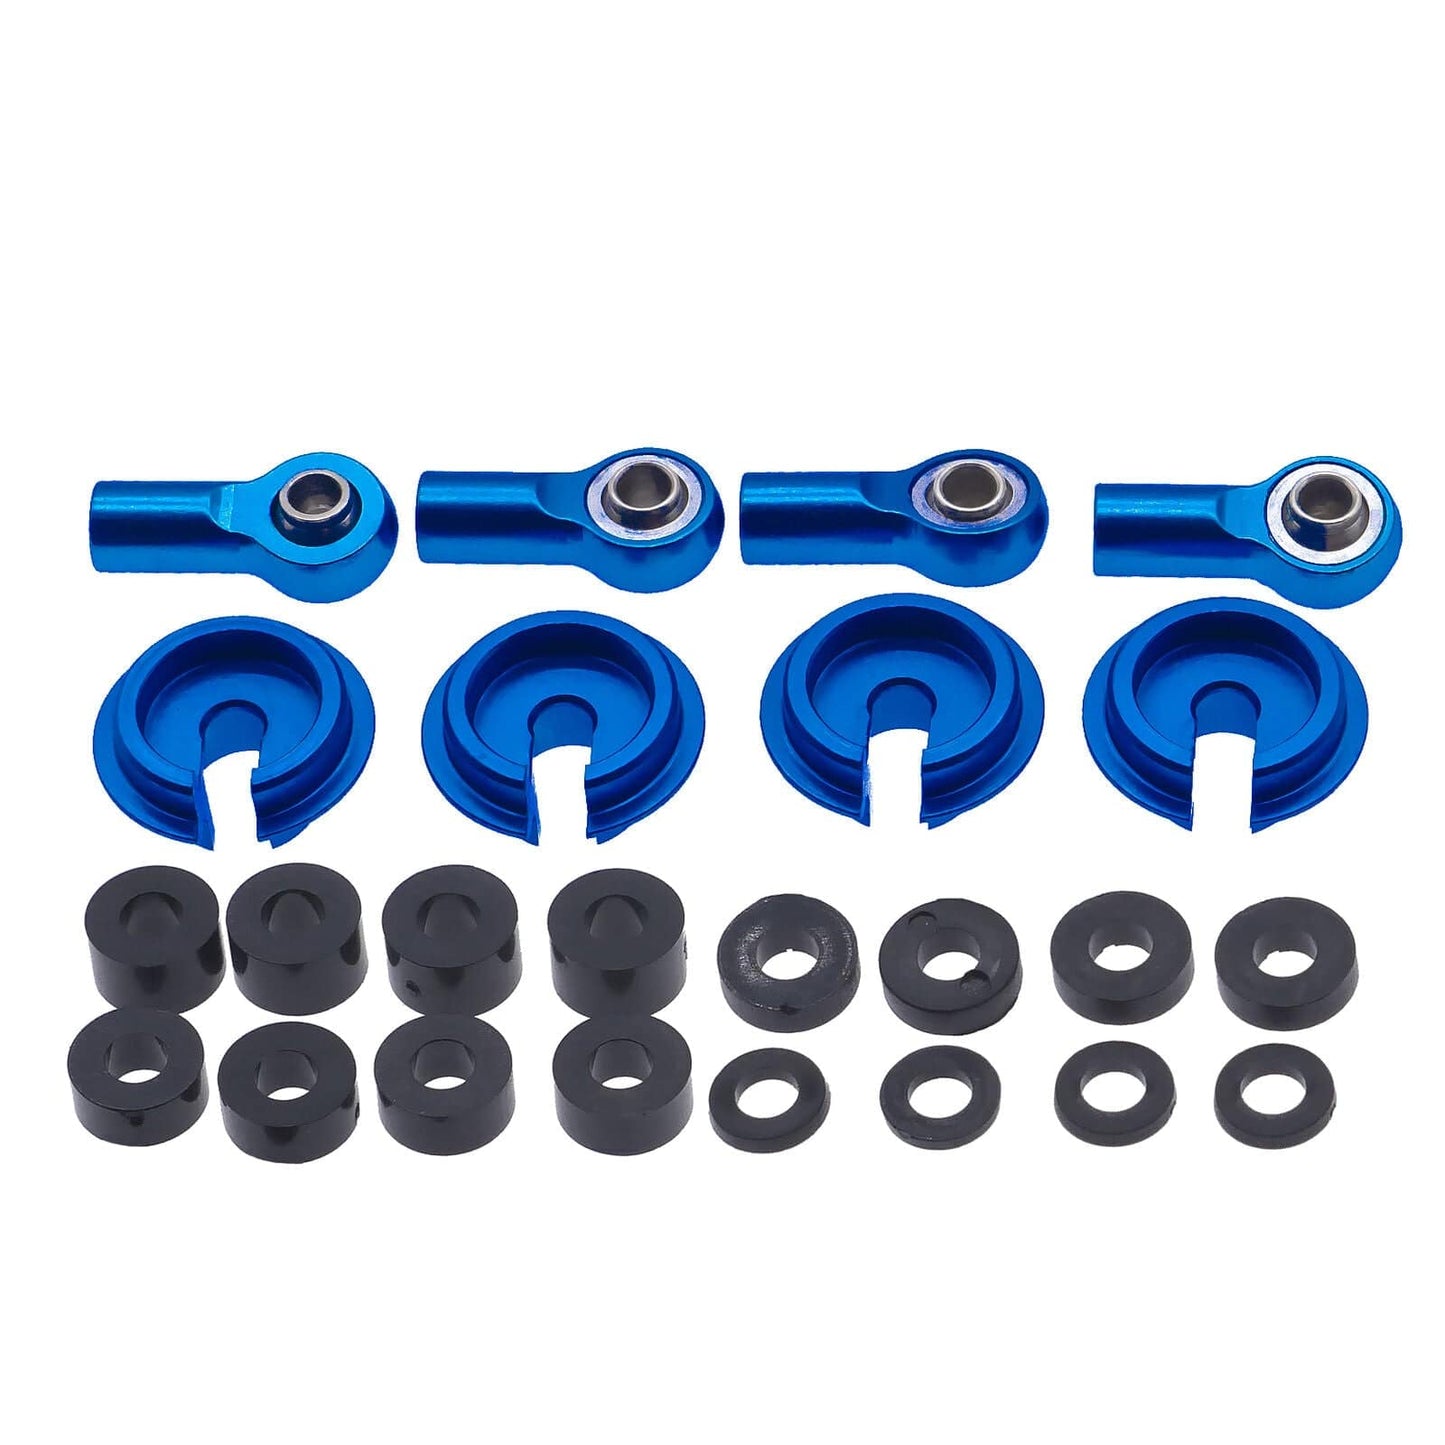 RCAWD ECX UPGRADE PARTS Dark Blue RCAWD Shock Ends Spring Cups Spring Clips for 1/10 ECX 2WD Series